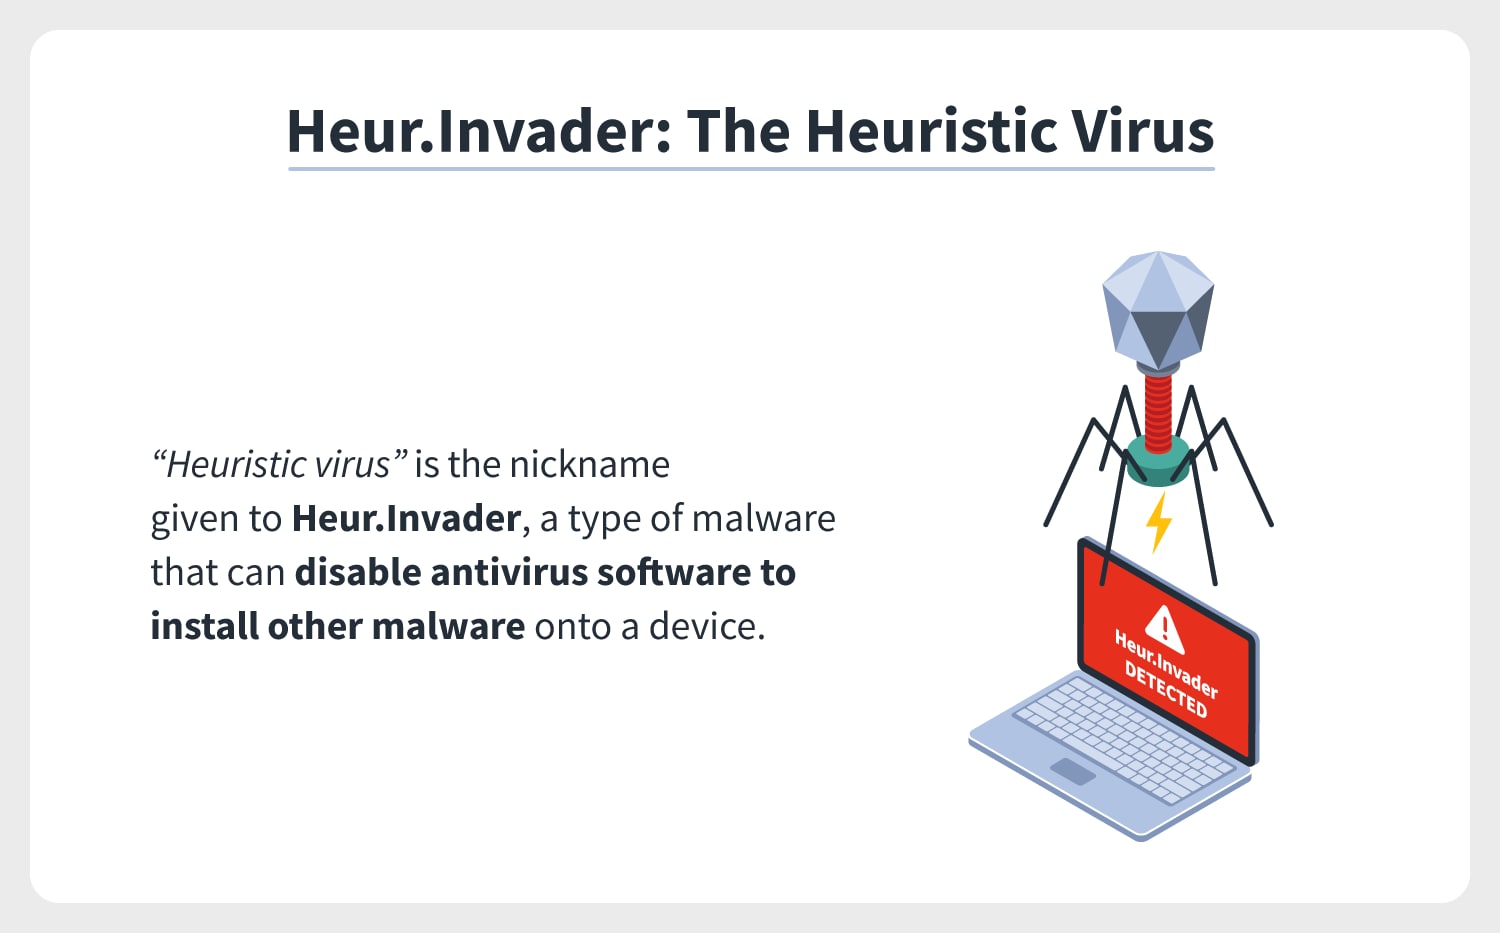 Use a reliable antivirus or anti-malware software to scan your computer for any potential threats.
If any malware or viruses are detected, follow the software's instructions to remove them.